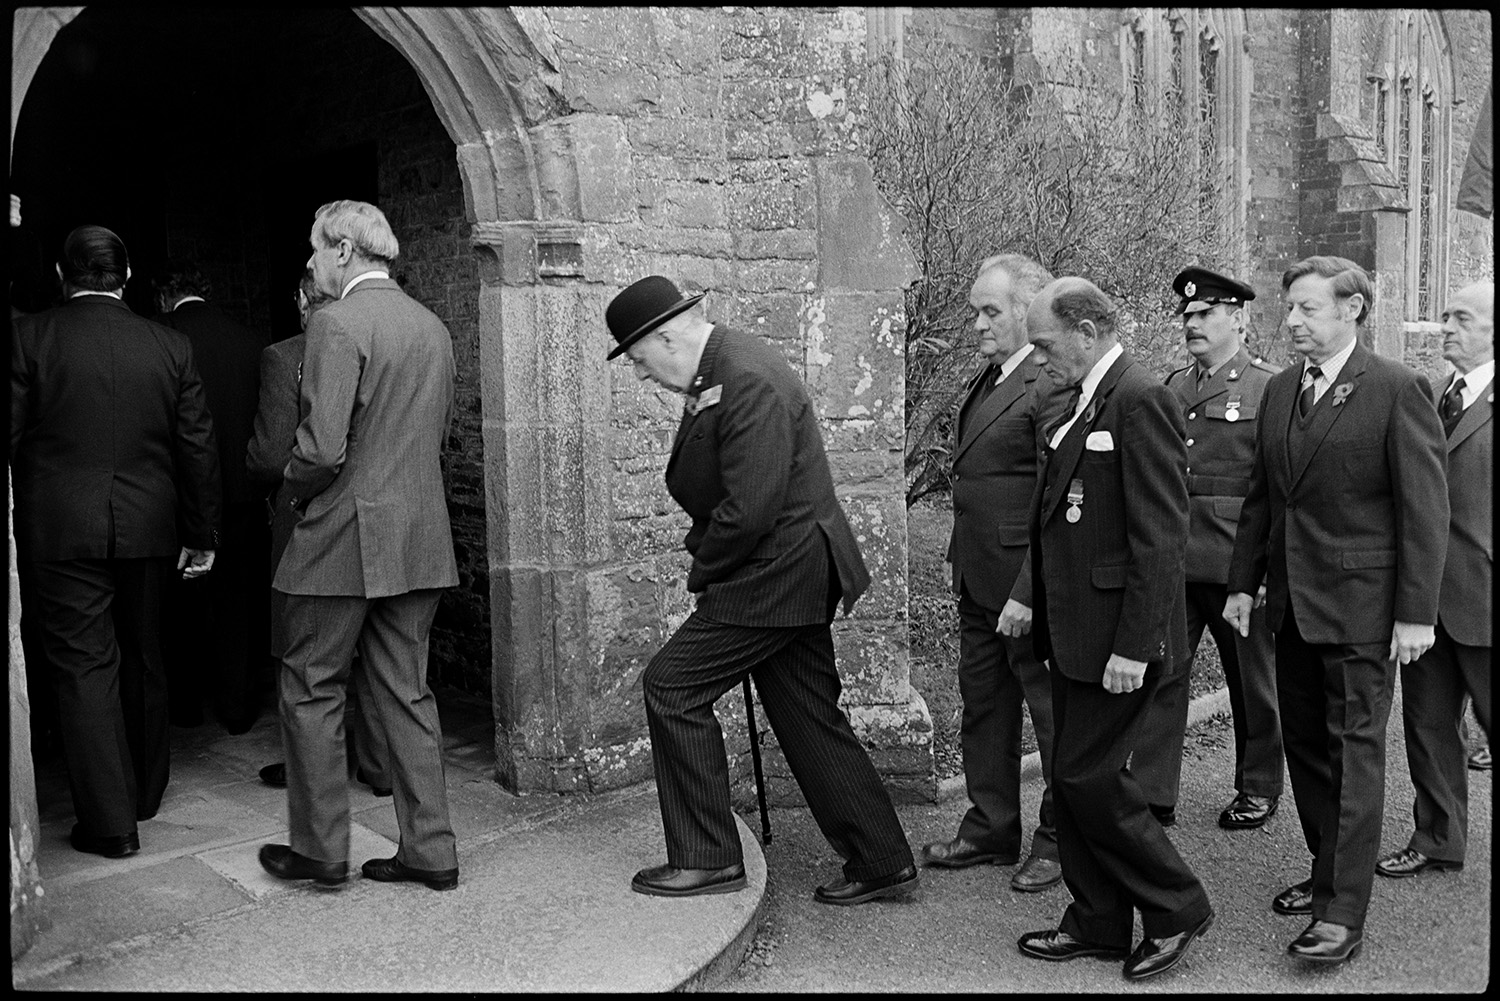 Parade at War Memorial, two minute silence, march to church, chatting afterwards, scouts.
[Men entering Chulmleigh Church during Remembrance Sunday or Armistice Day. They are wearing poppies and some of them are wearing medals. One man is wearing a military uniform.]